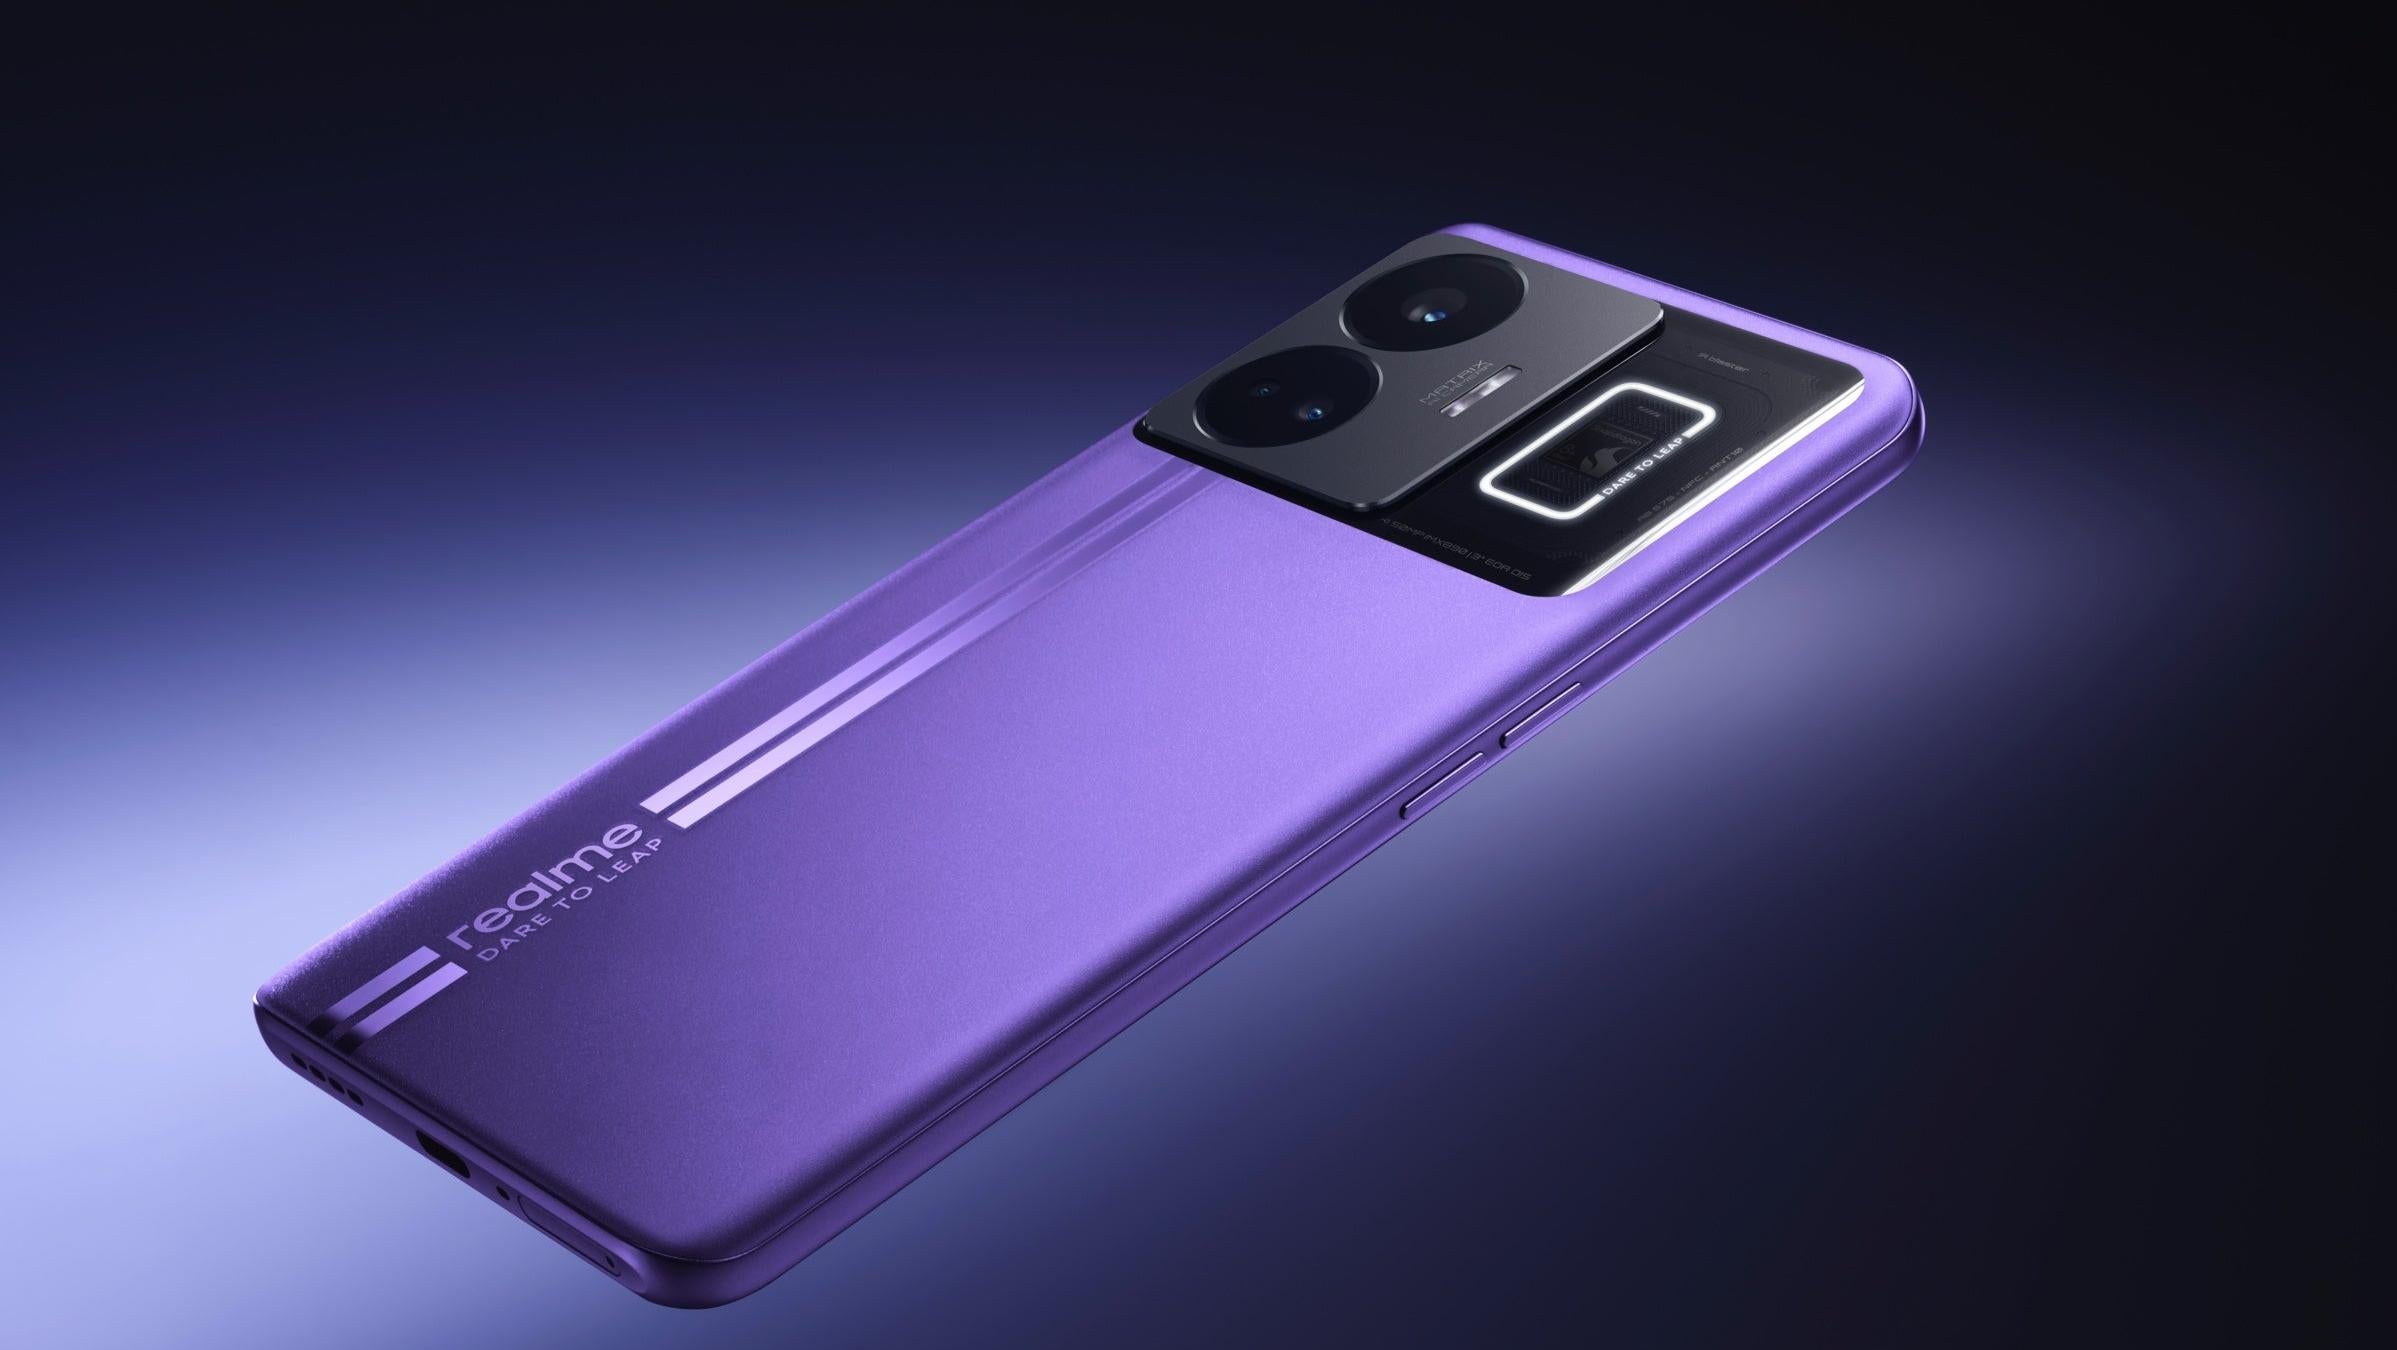 The Realme GT Neo 5 phone is claiming the fastest charging speeds of any other phone, though its specs and price are decidedly middle of the road in every other way. (Image: Realme)